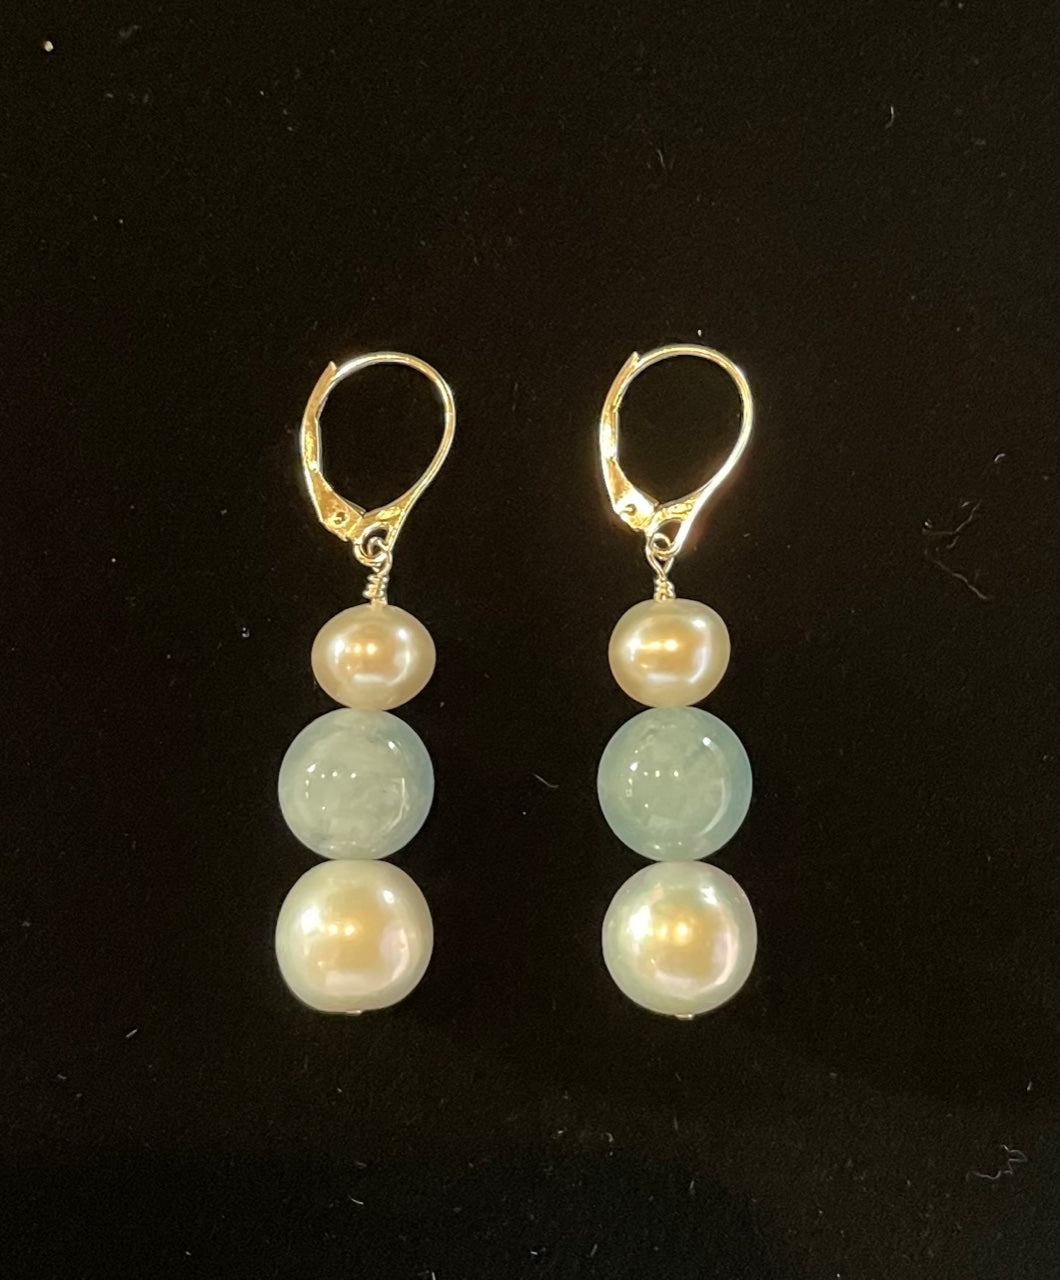 Earrings - Hanging with 12mm white pearls, aquamarine and white button pearls